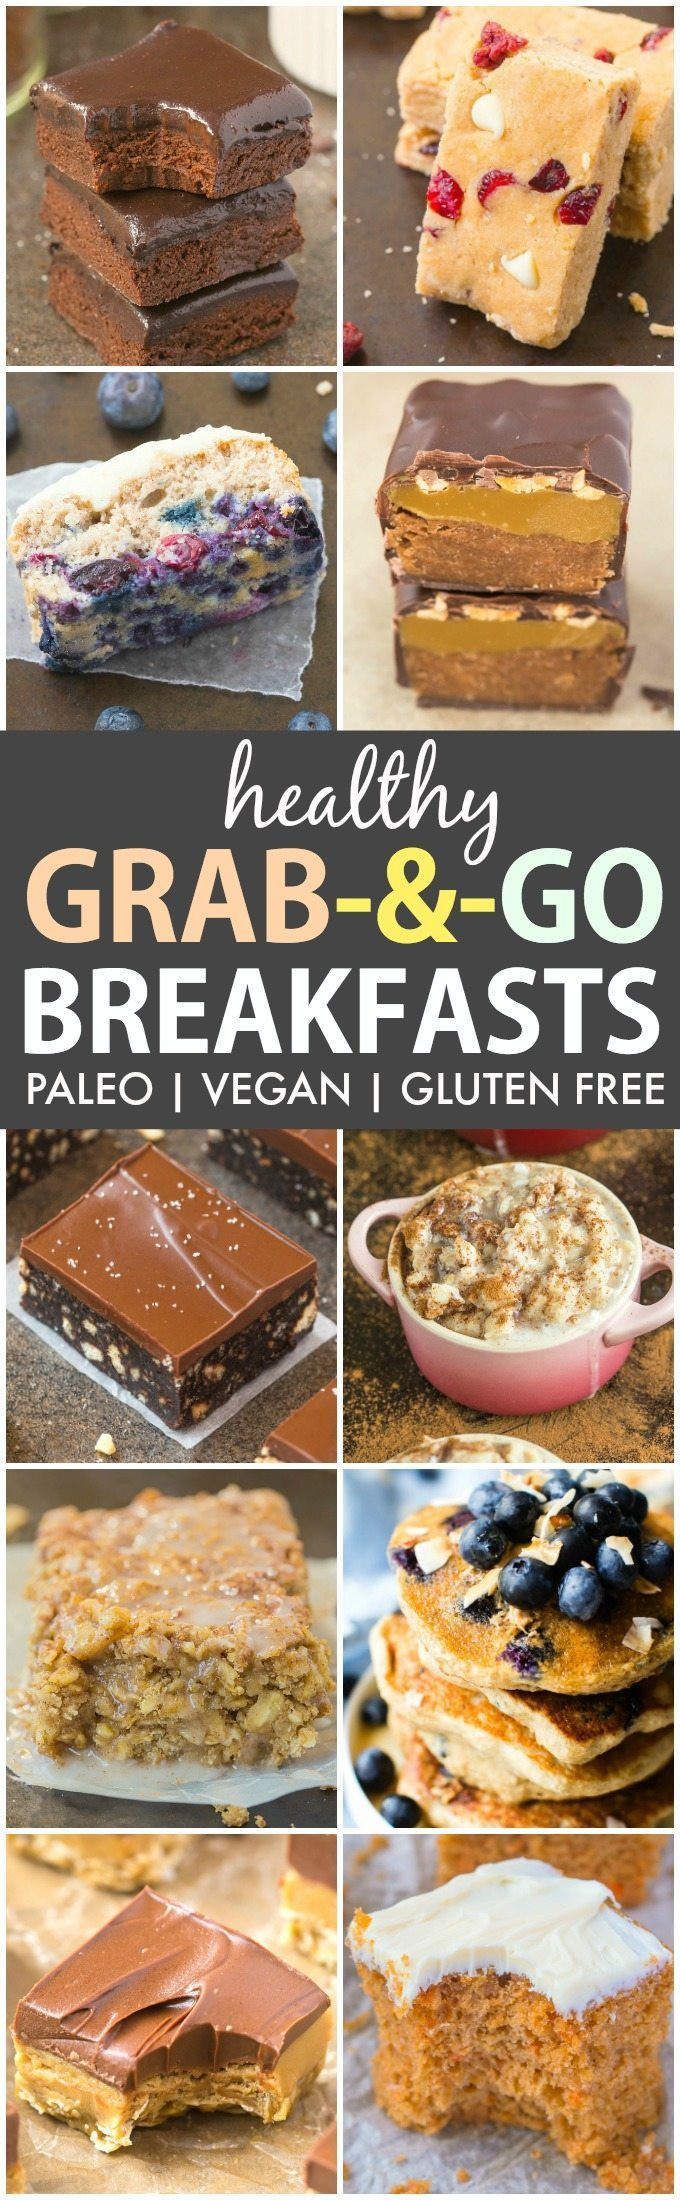 Healthy Grab And Go Breakfast
 25 Easy and Healthy Grab and Go Breakfast Ideas Paleo